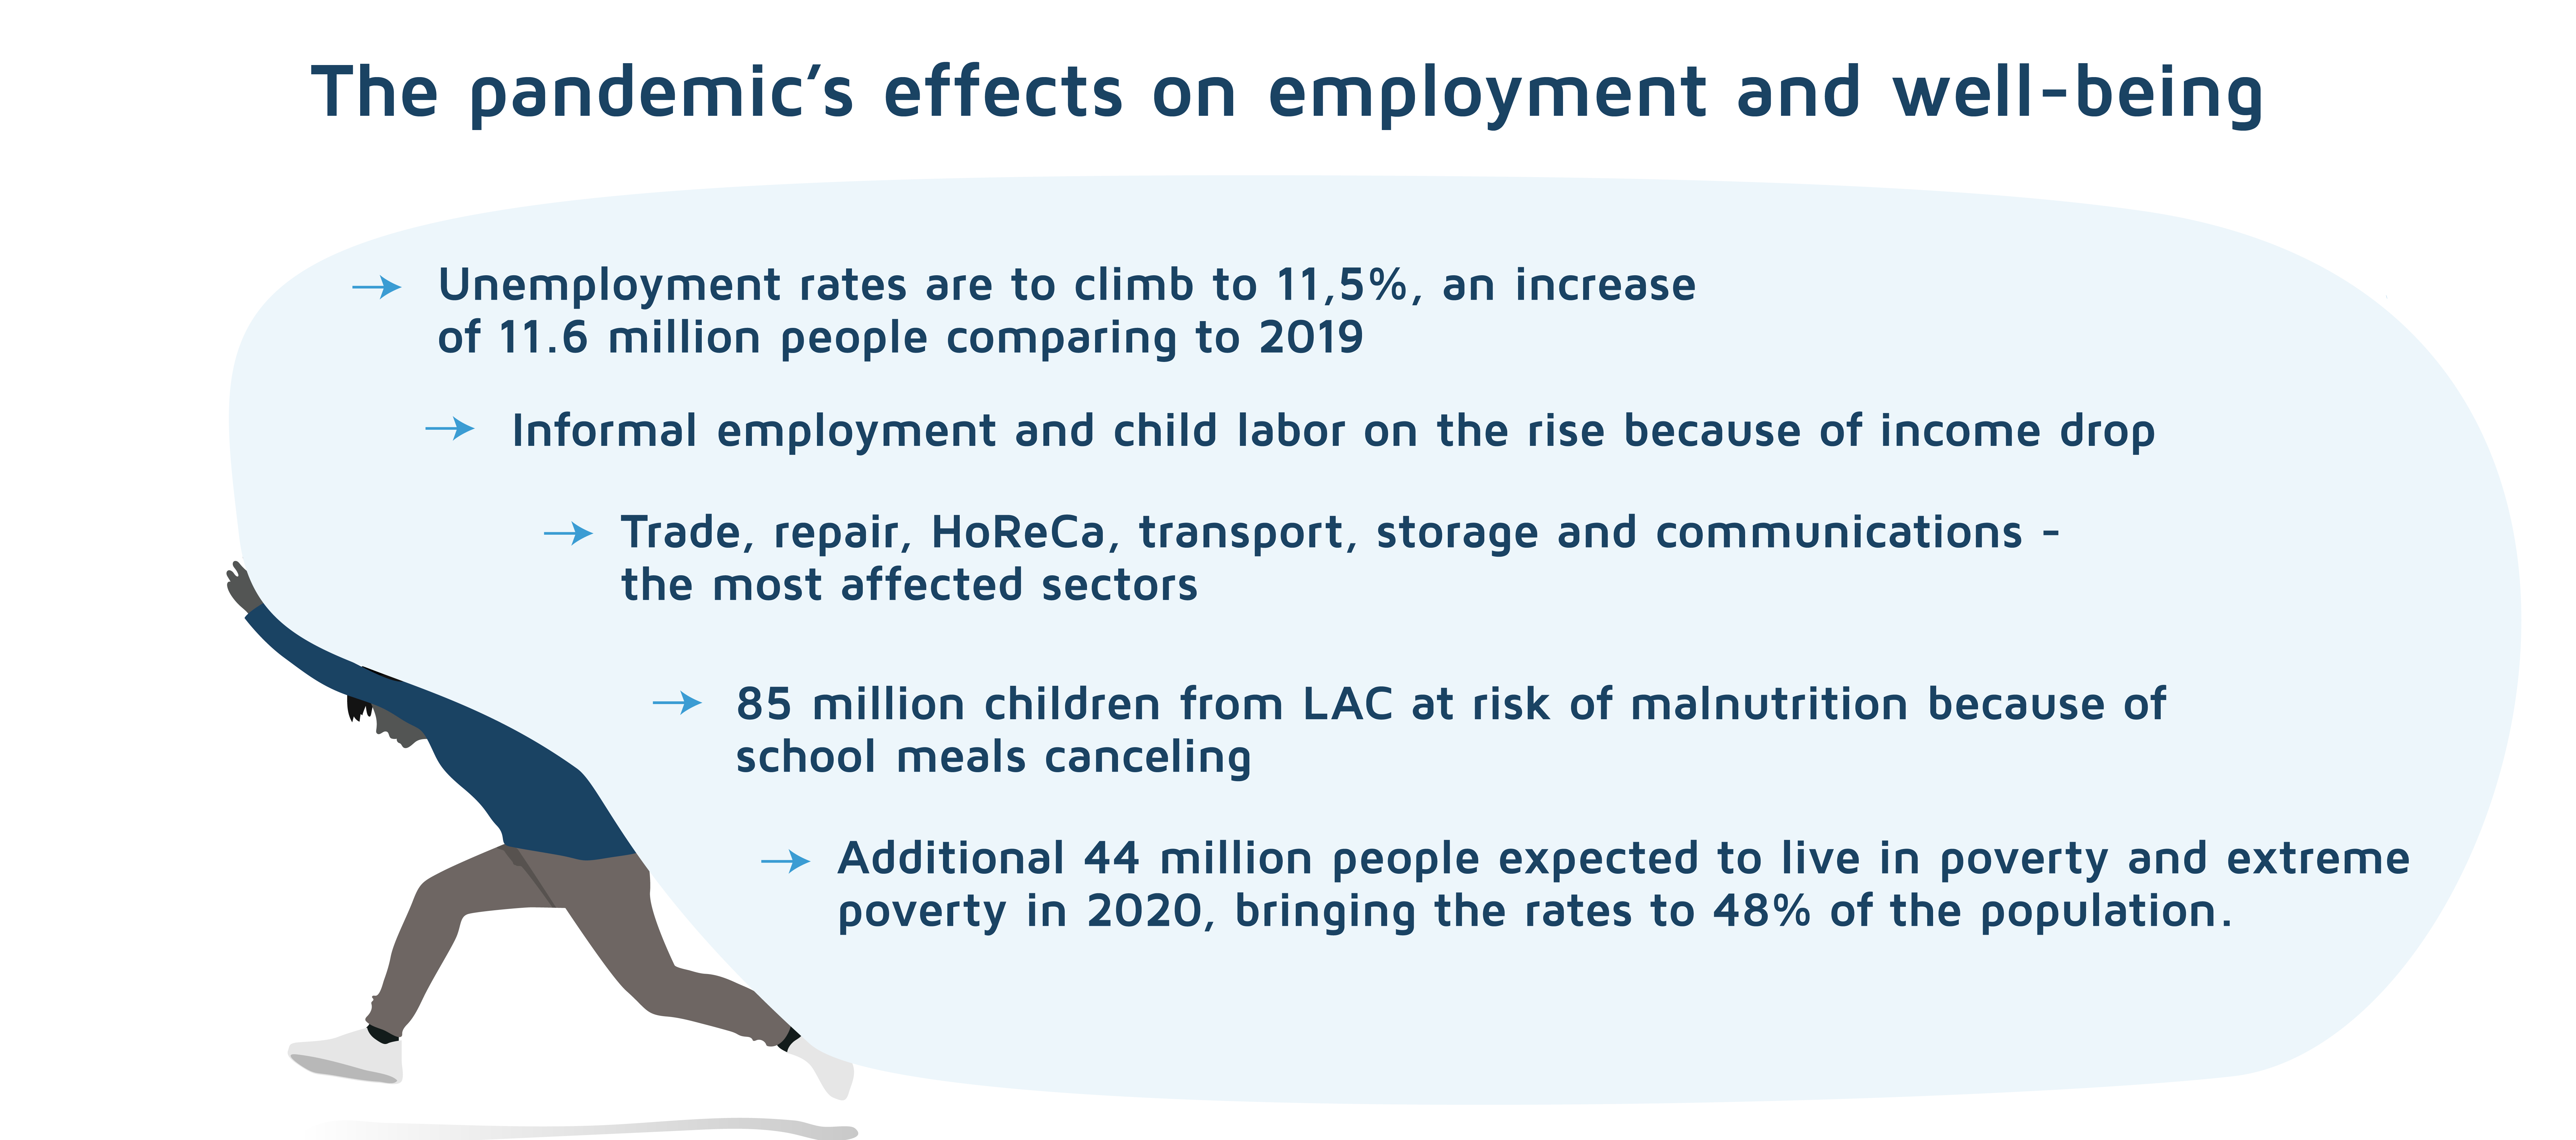 The pandemics effects on employment and well-being in Latin America and the Caribbean